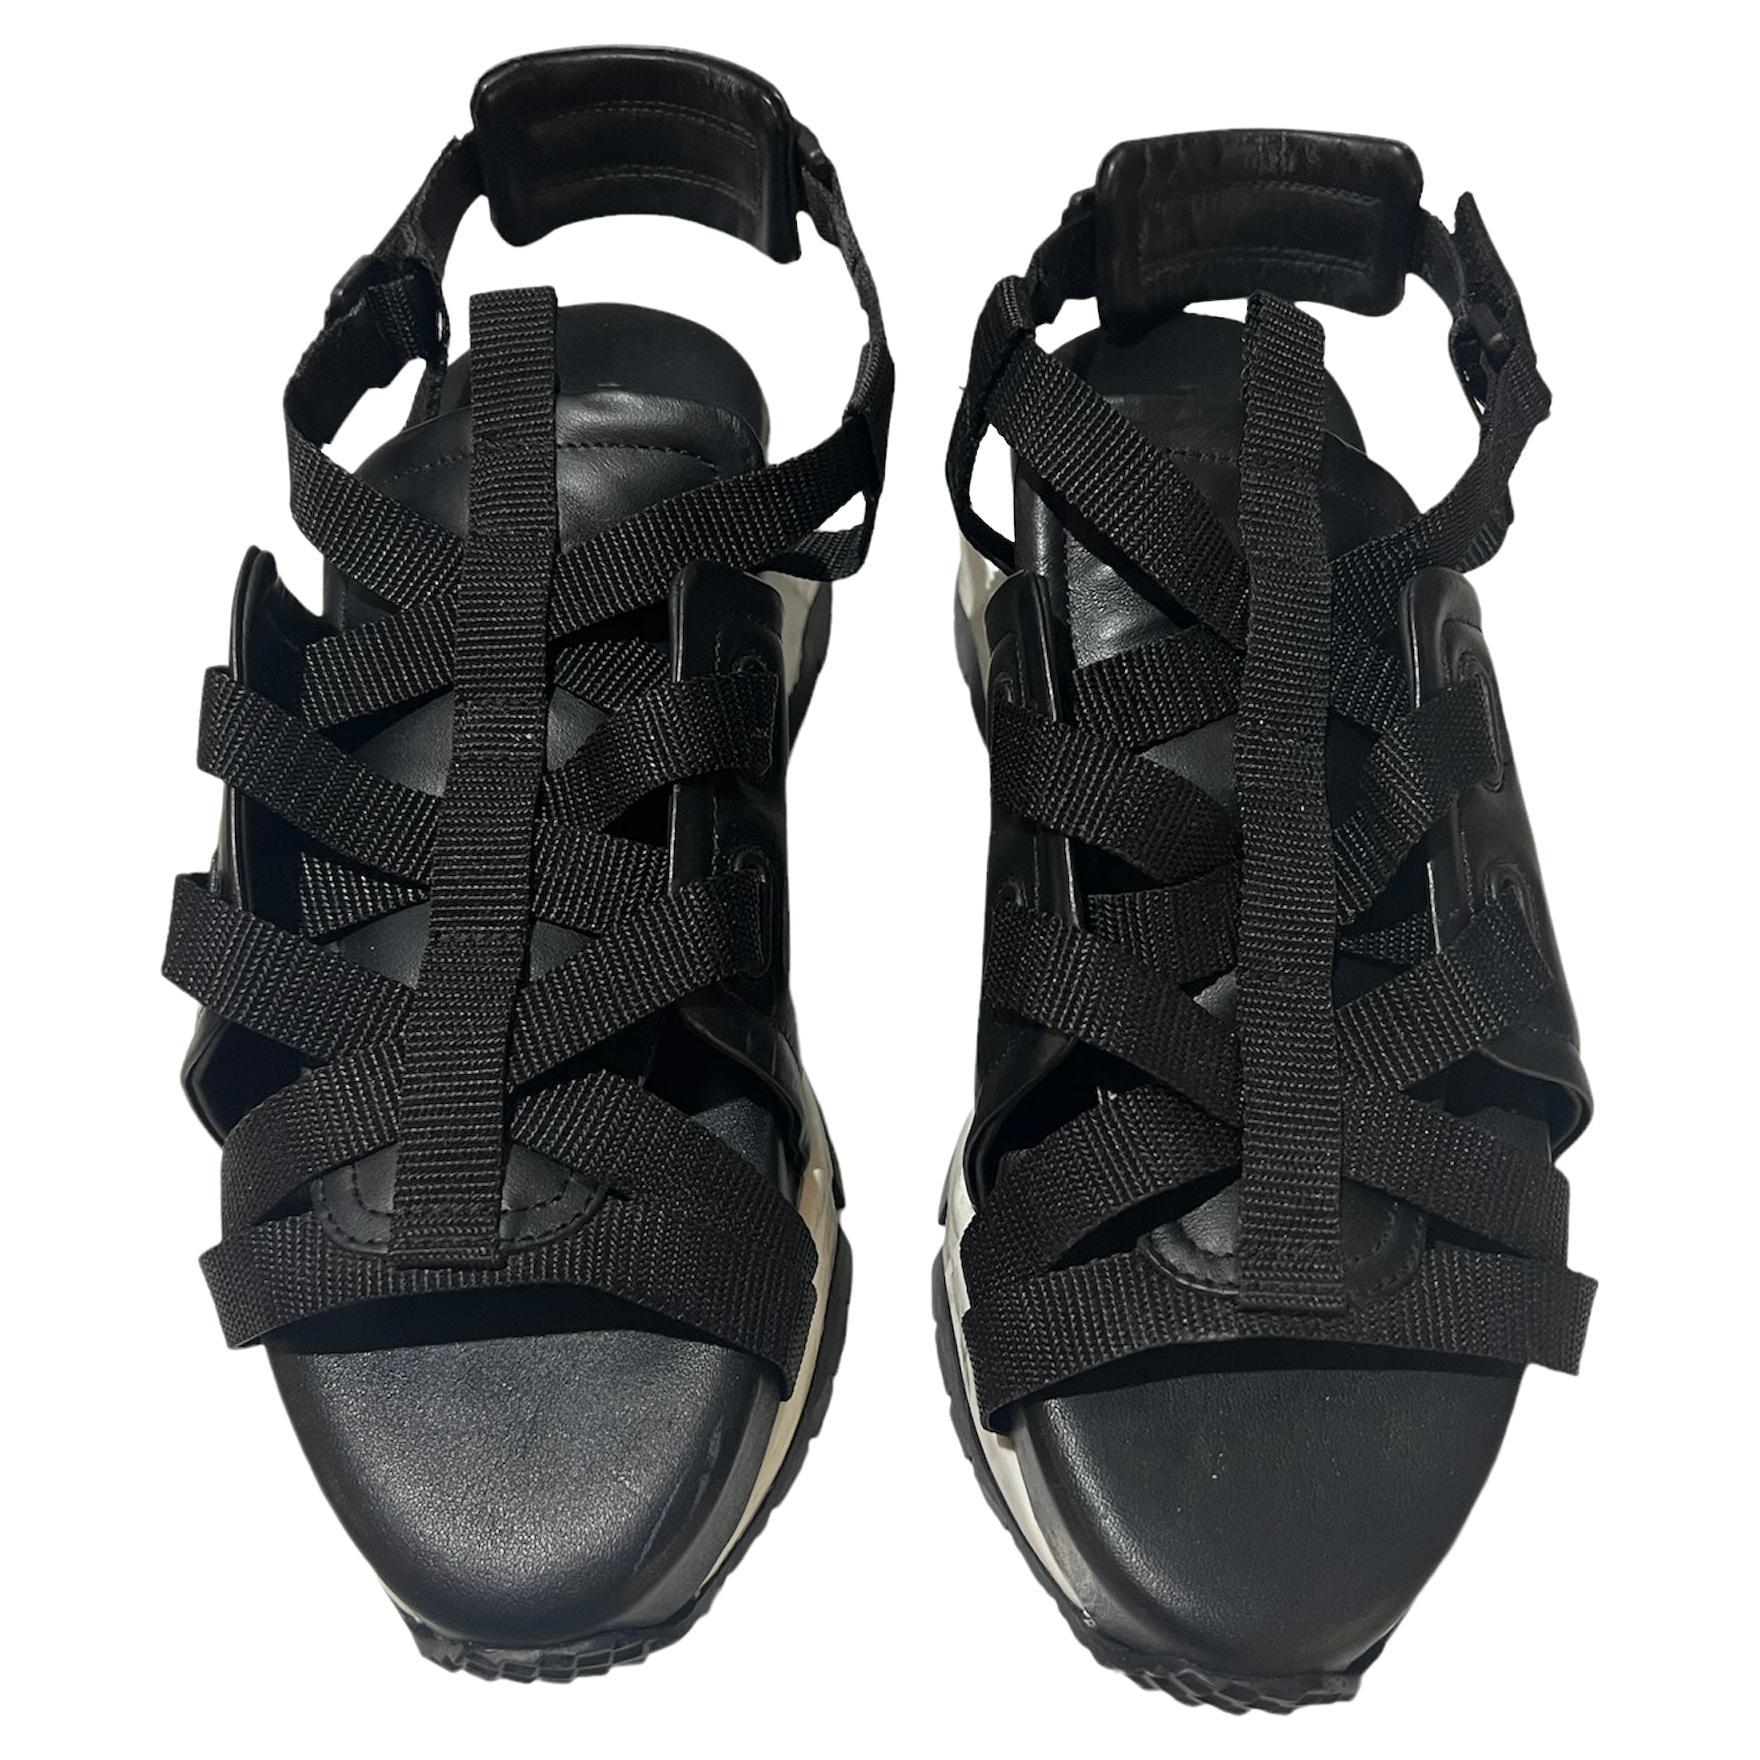 Pierre Hardy Black and White Sandals Shoes, Size 39 For Sale